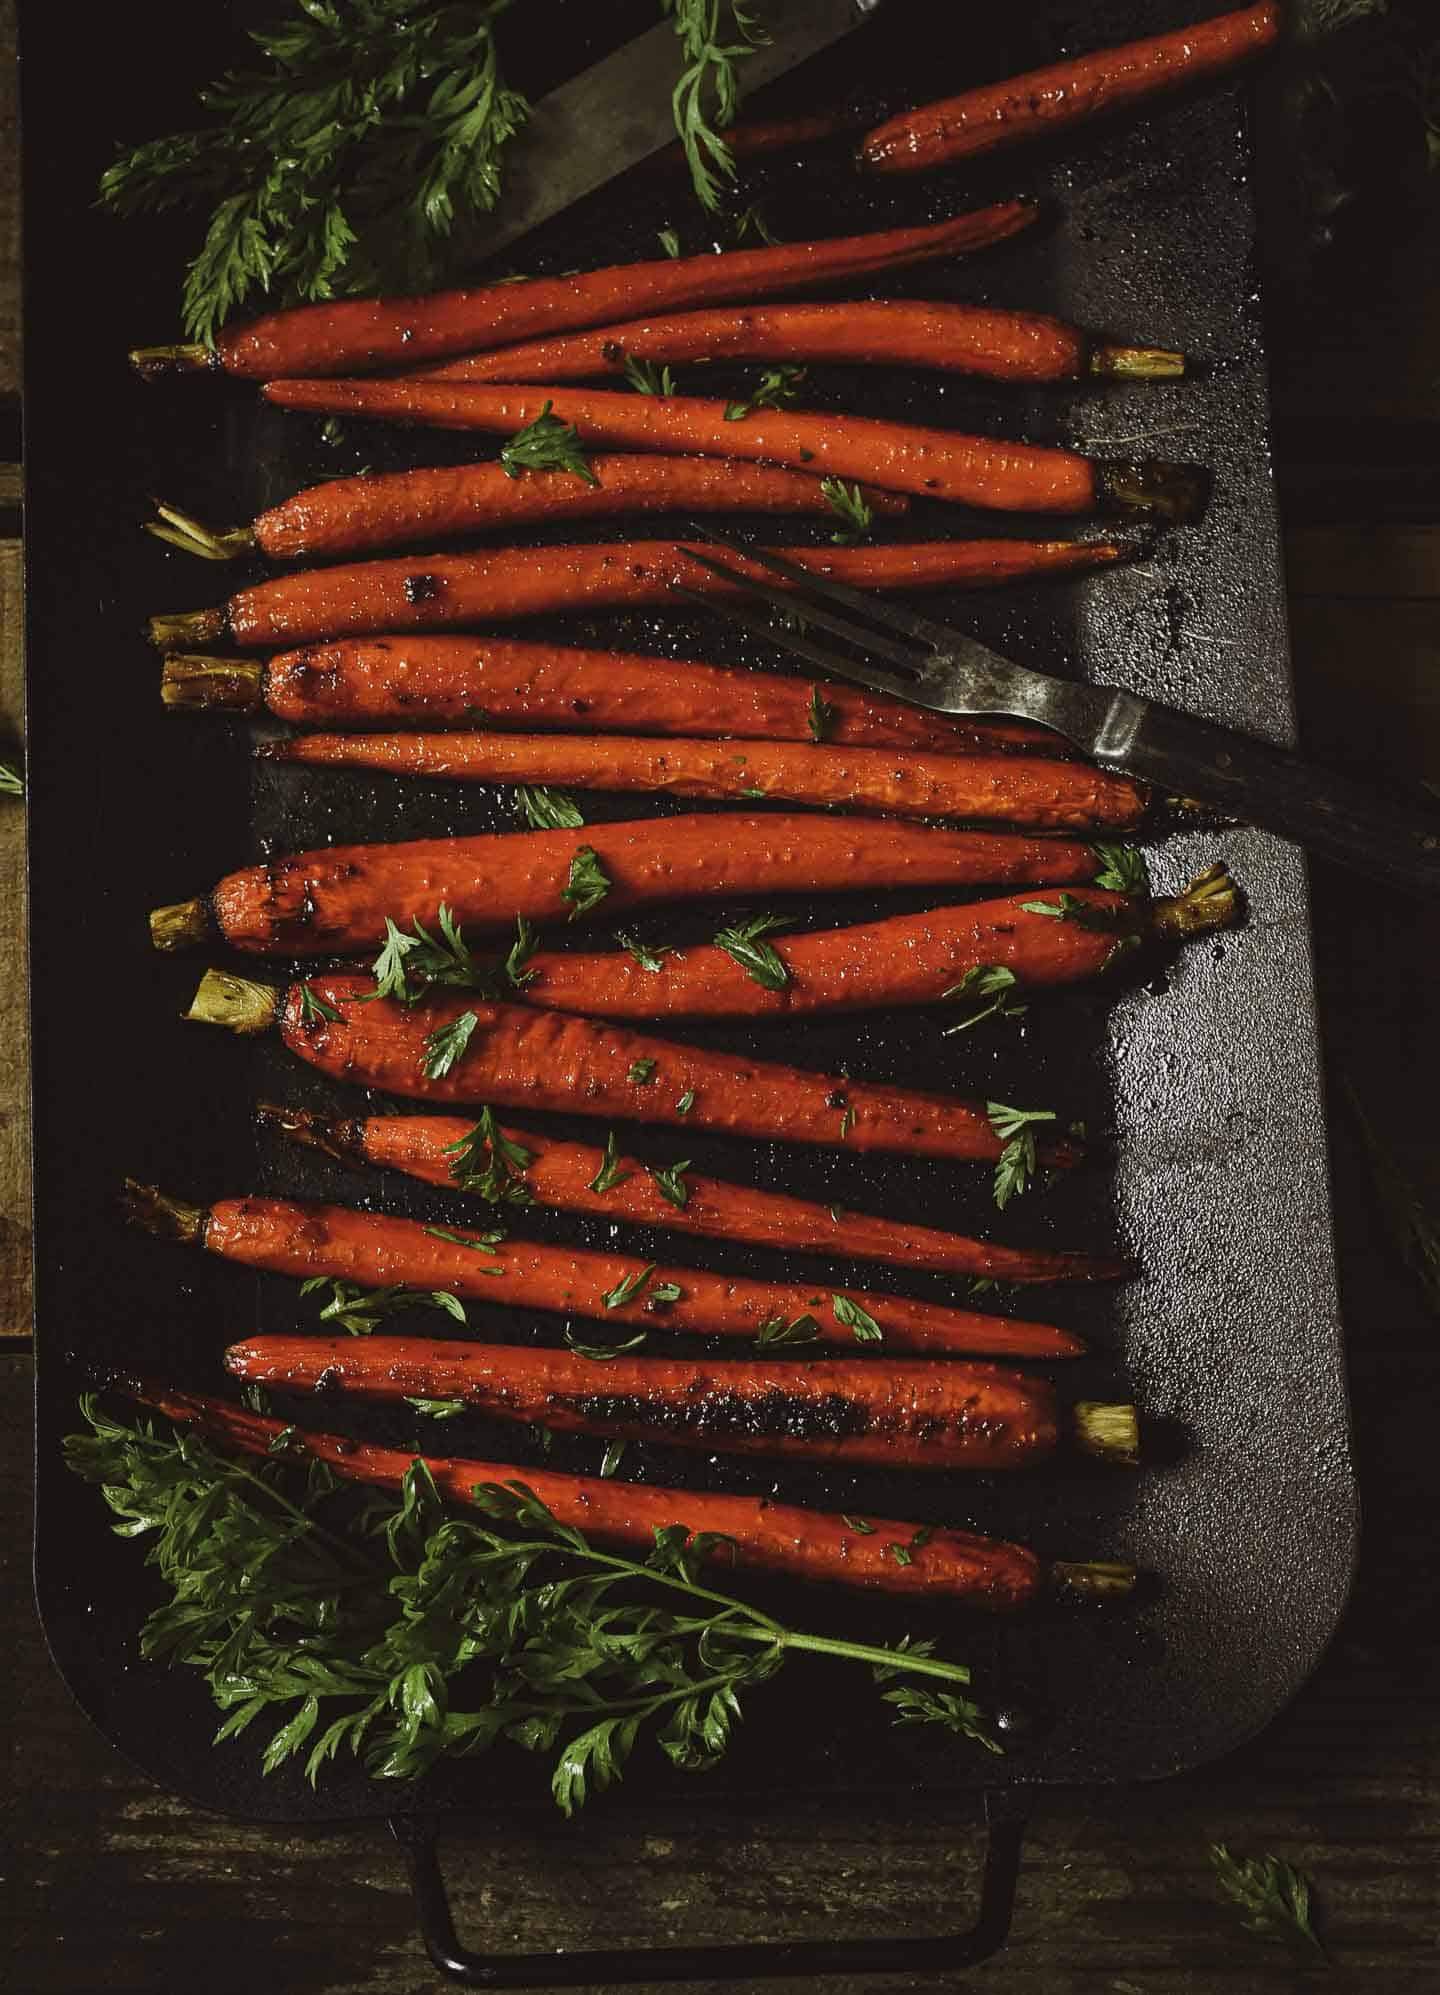 These Maple Roasted Carrots are sweet, savory, and so easy to make. All you need are 7 simple ingredients to make a delicious side dish even kids will love! Vegan, oil-free, and healthy.